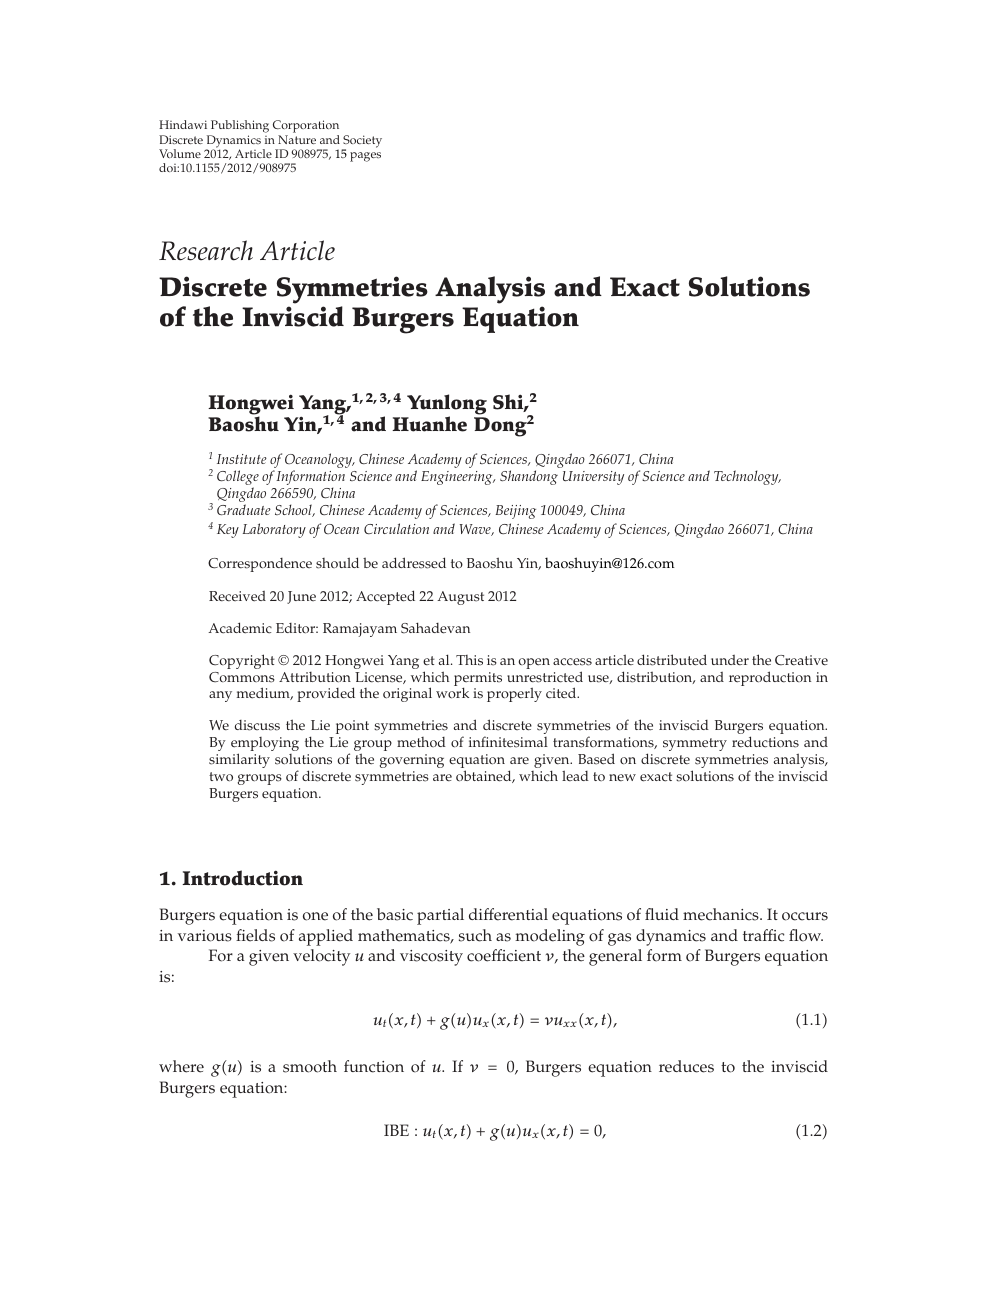 Discrete Symmetries Analysis And Exact Solutions Of The Inviscid Burgers Equation Topic Of Research Paper In Mathematics Download Scholarly Article Pdf And Read For Free On Cyberleninka Open Science Hub